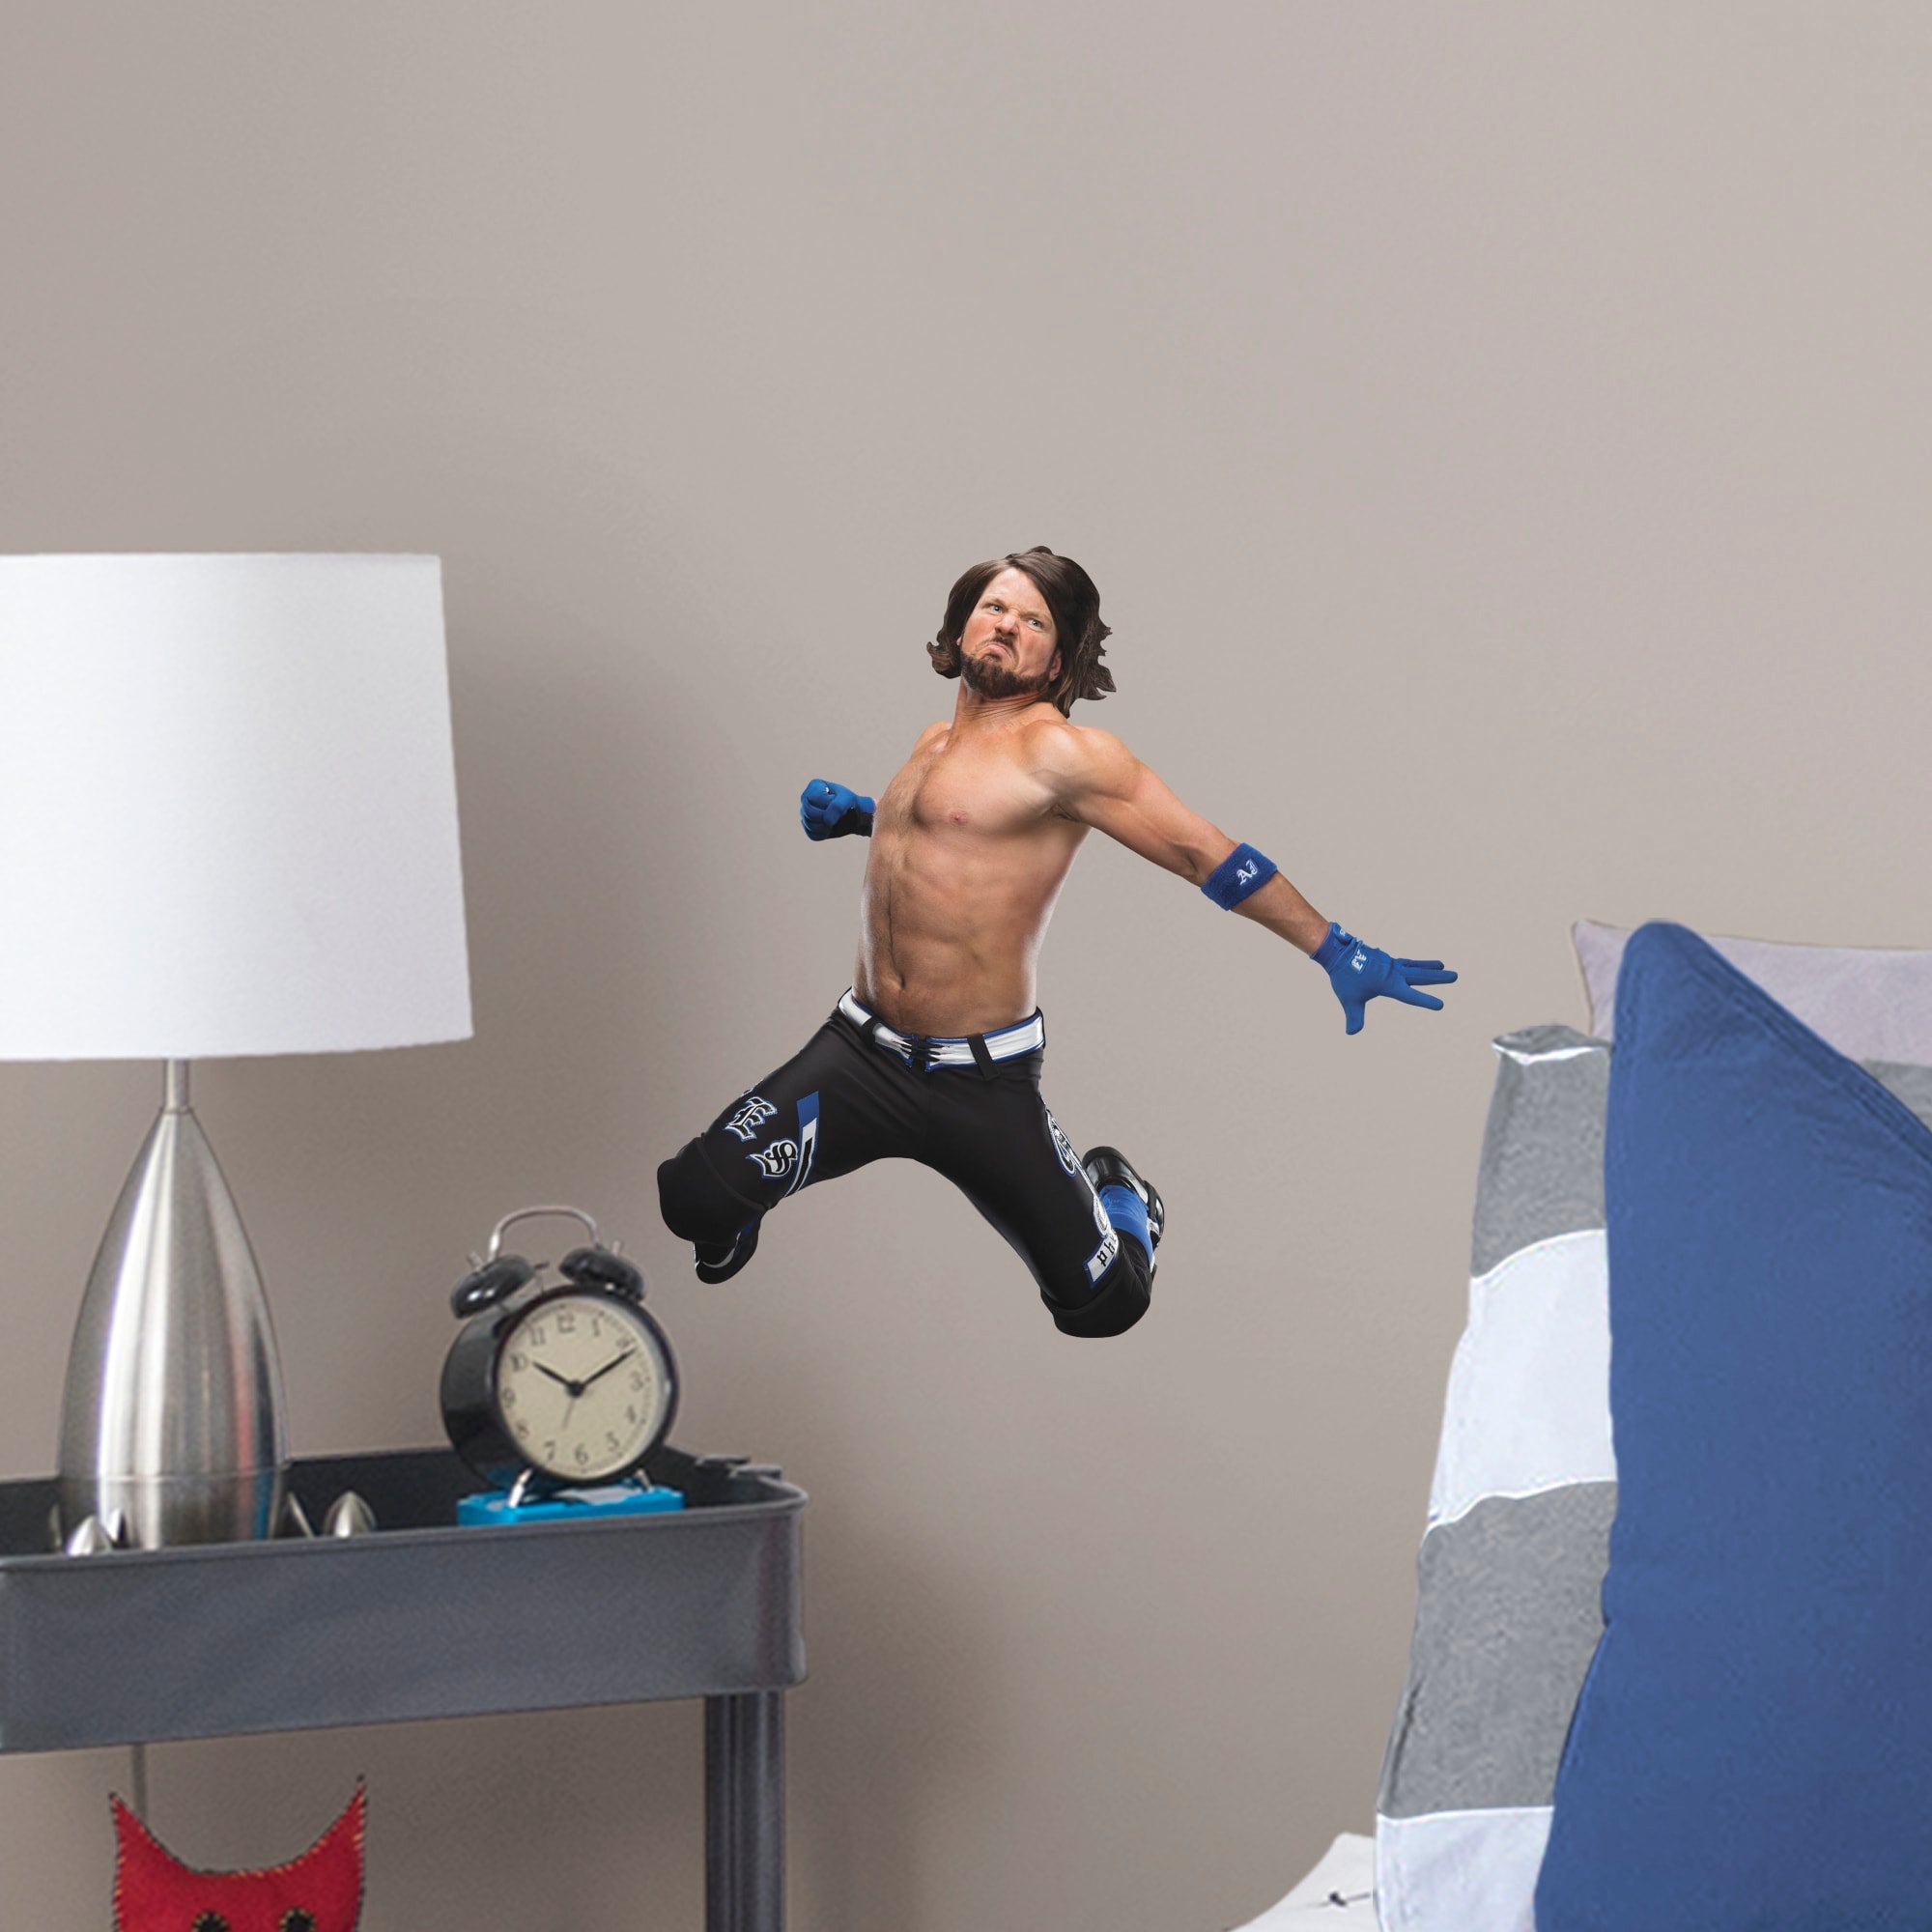 AJ Styles for WWE: Attack - Officially Licensed Removable Wall Decal Large by Fathead | Vinyl